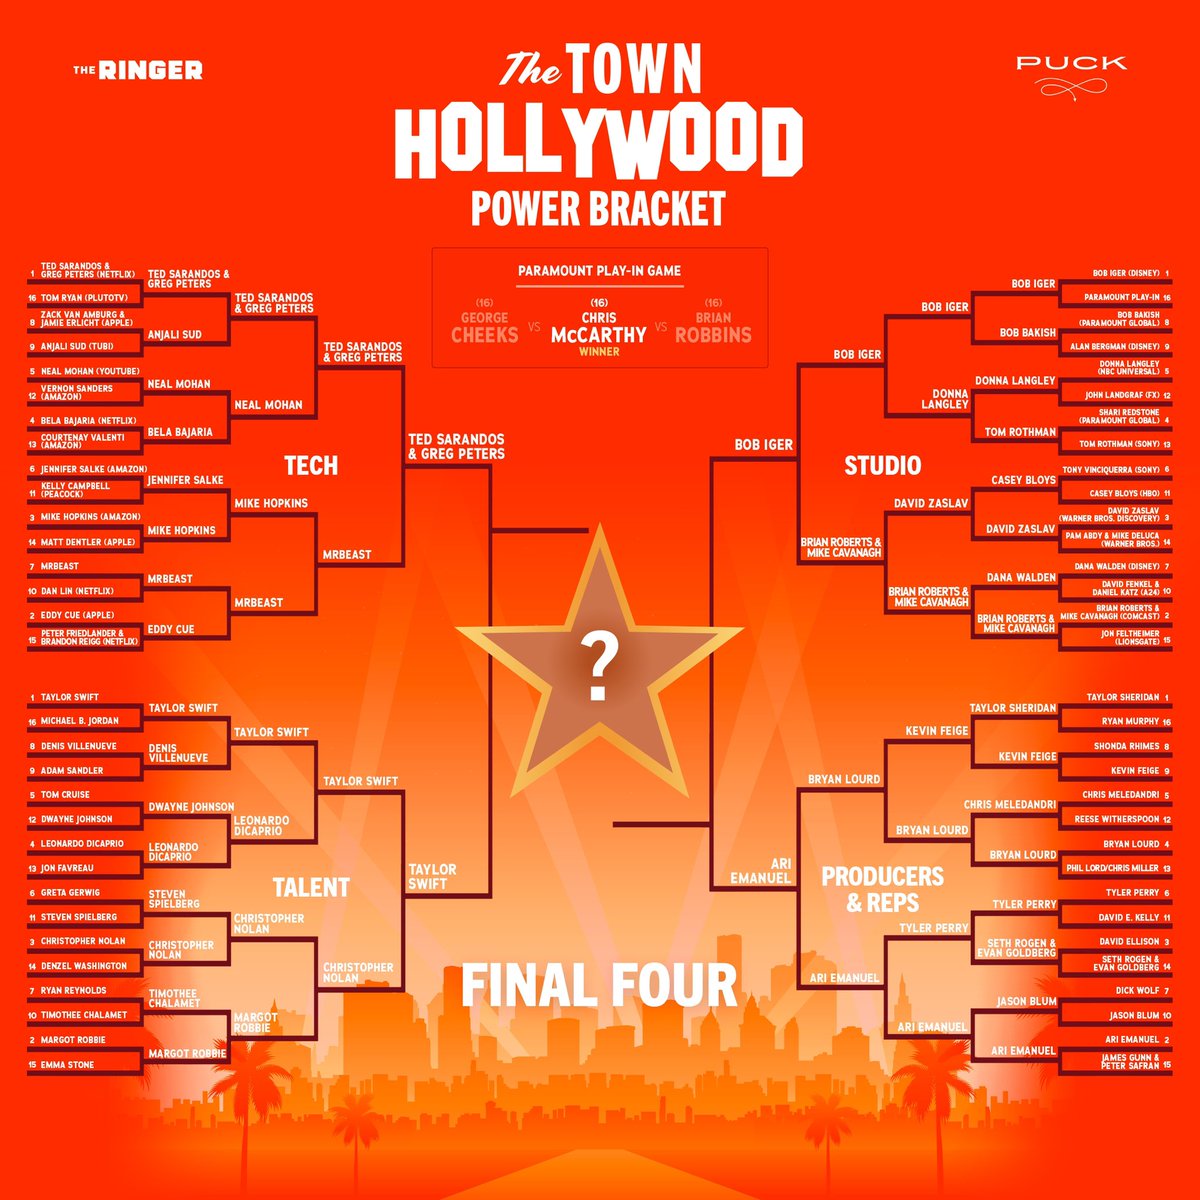 Final Four of the official Hollywood Power bracket is now SET. You can vote for which players should be in the Championship below. Good luck!